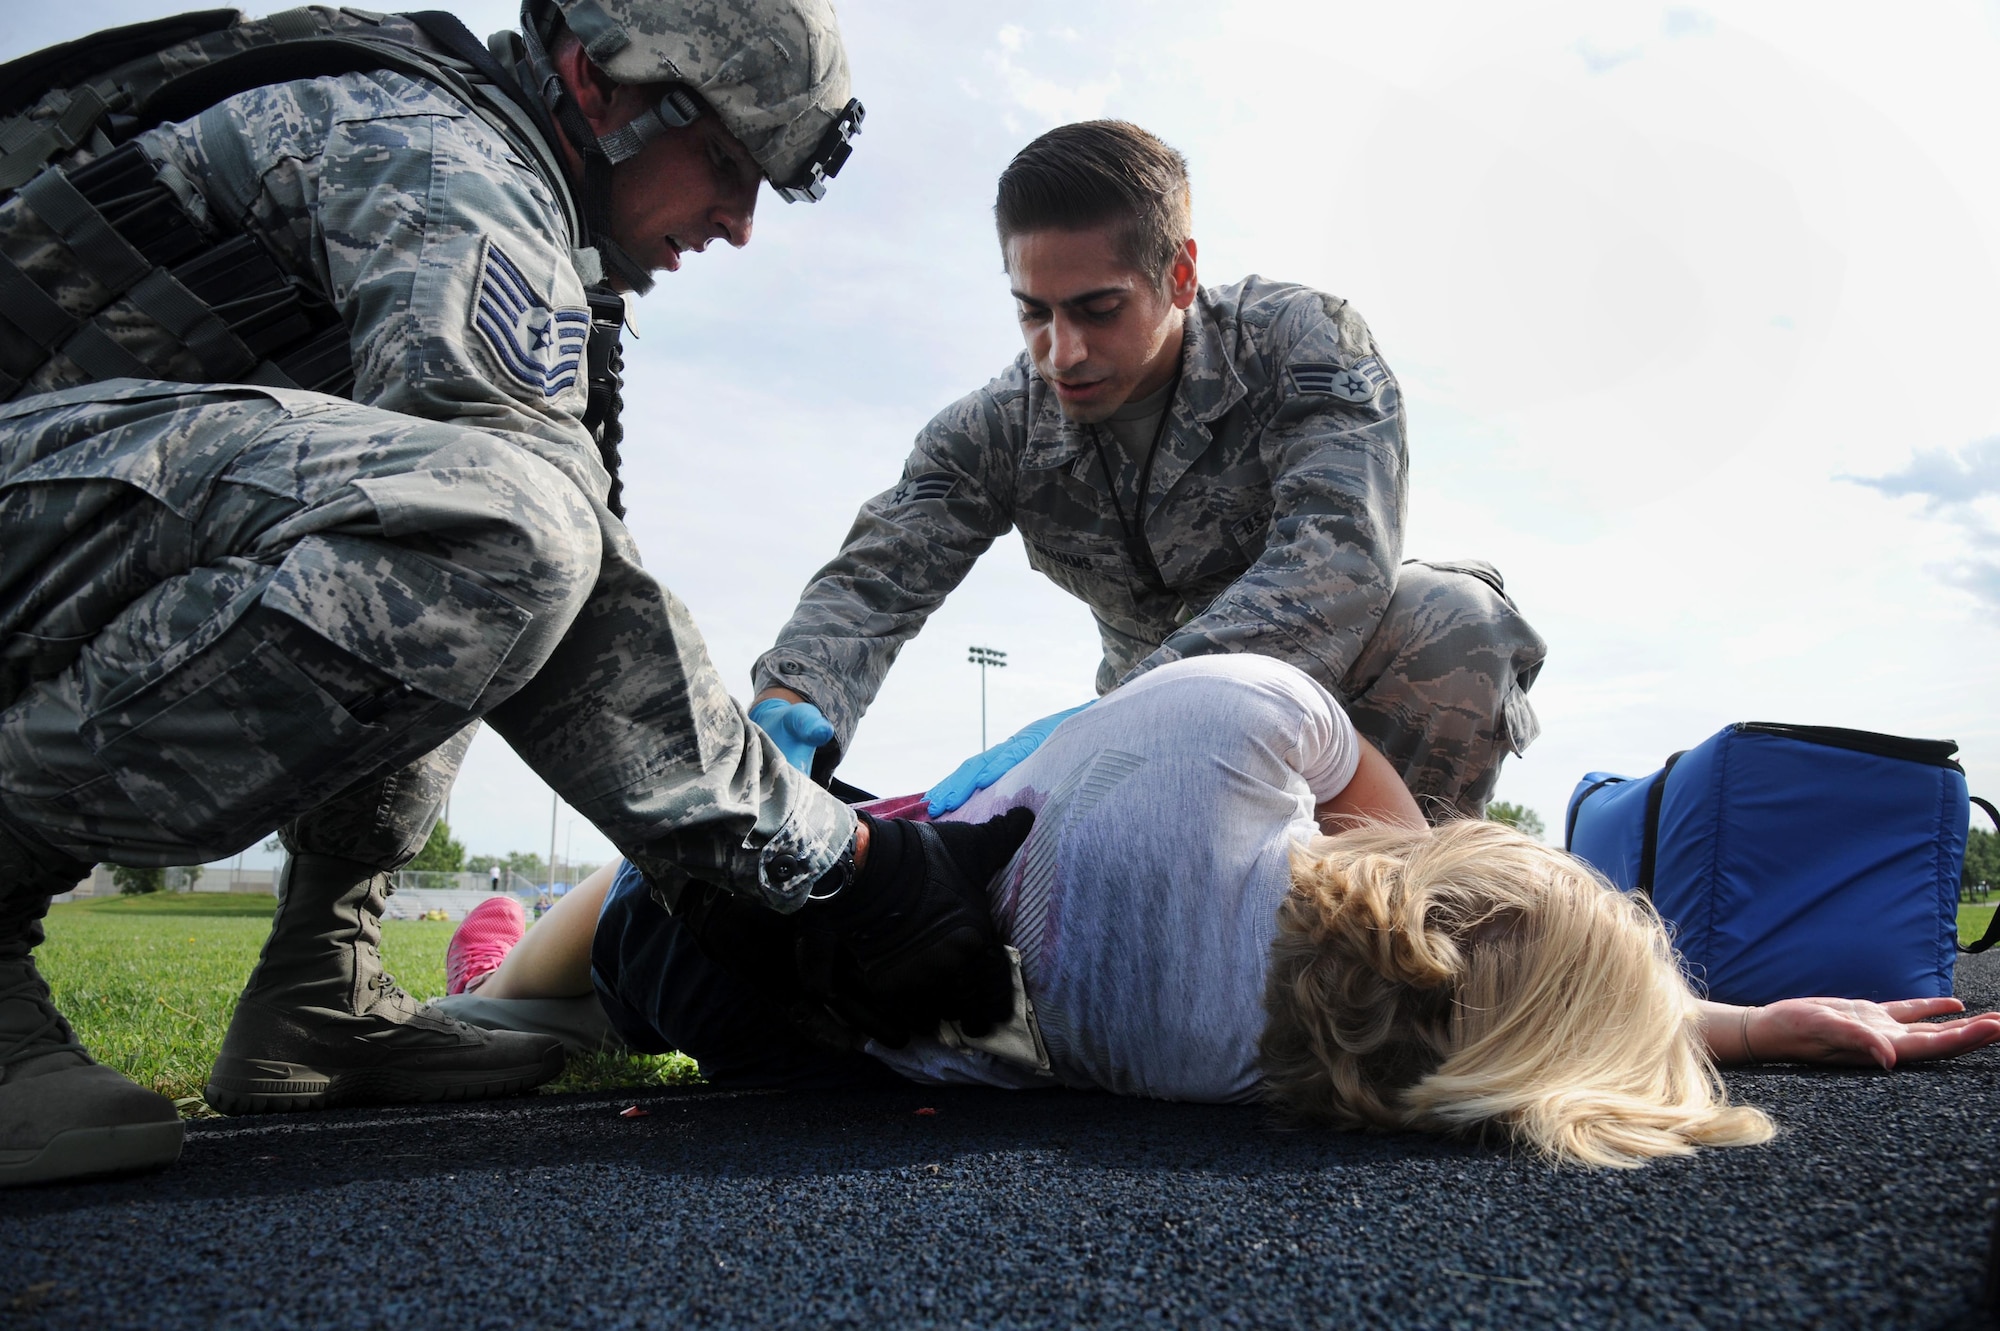 U.S. Air Force Tech. Sgt. Jonathan Arnio, a 509th Security Forces Squadron assistant NCO in charge of training, left, and Senior Airman Zachary Williams, a 509th Medical Operations Squadron aerospace medical technician, right, examine a victim for a simulated wound during an active shooter exercise at Whiteman Air Force Base, Mo., Aug. 5, 2016. Whiteman hosts an active shooter exercise bi-annually to raise awareness for first responders and all of Team Whiteman on how to react in case of a real-life active shooter incident. 